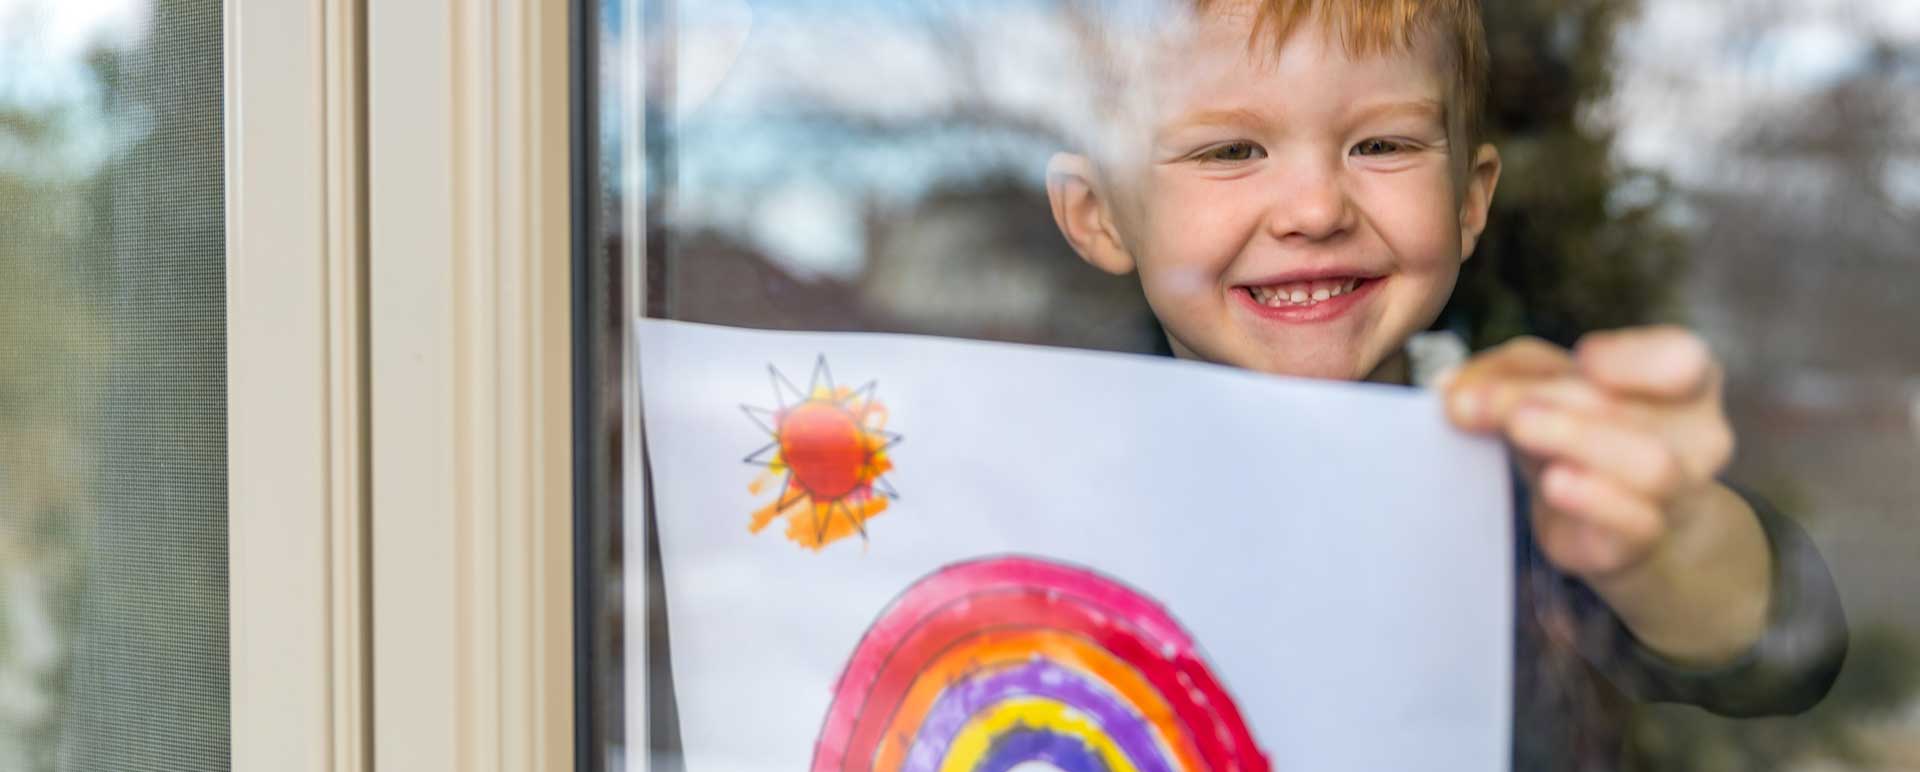 Boy holding up a drawing of a rainbow through a window